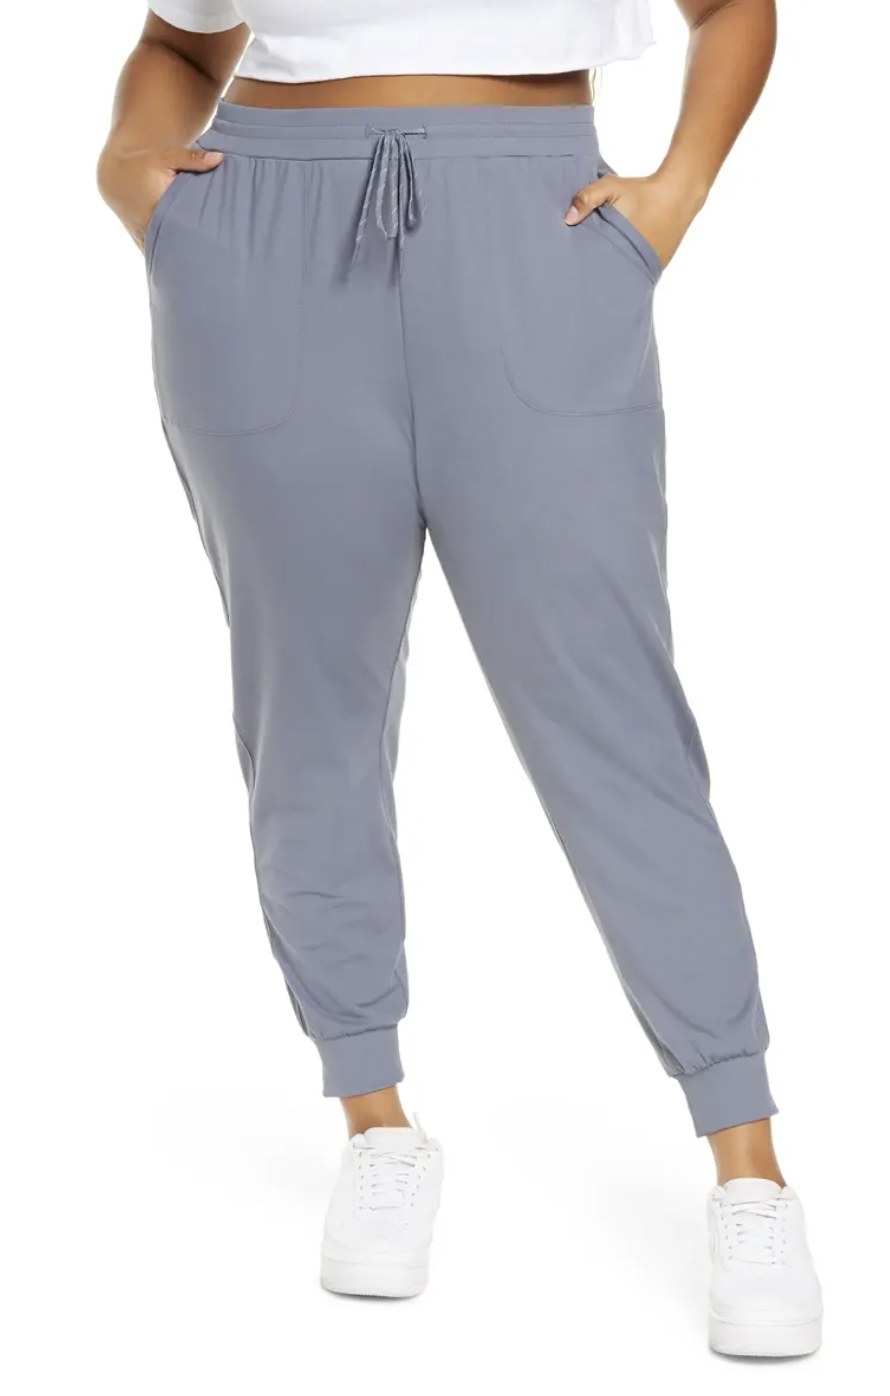 The blue grey joggers